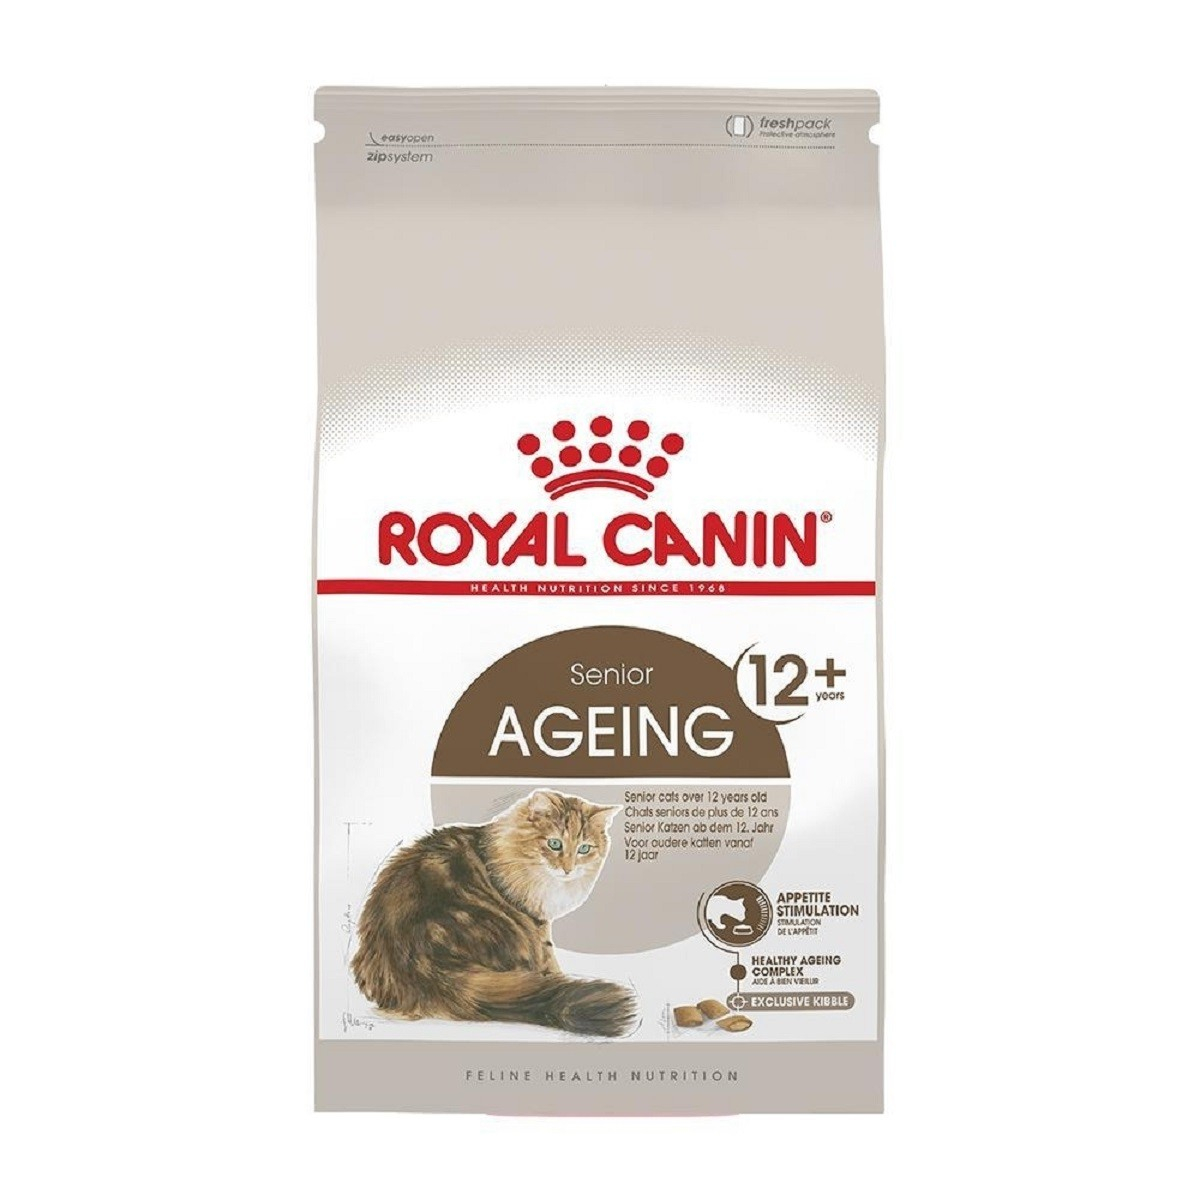 Trots Ster Kind Royal Canin Senior Ageing 12+